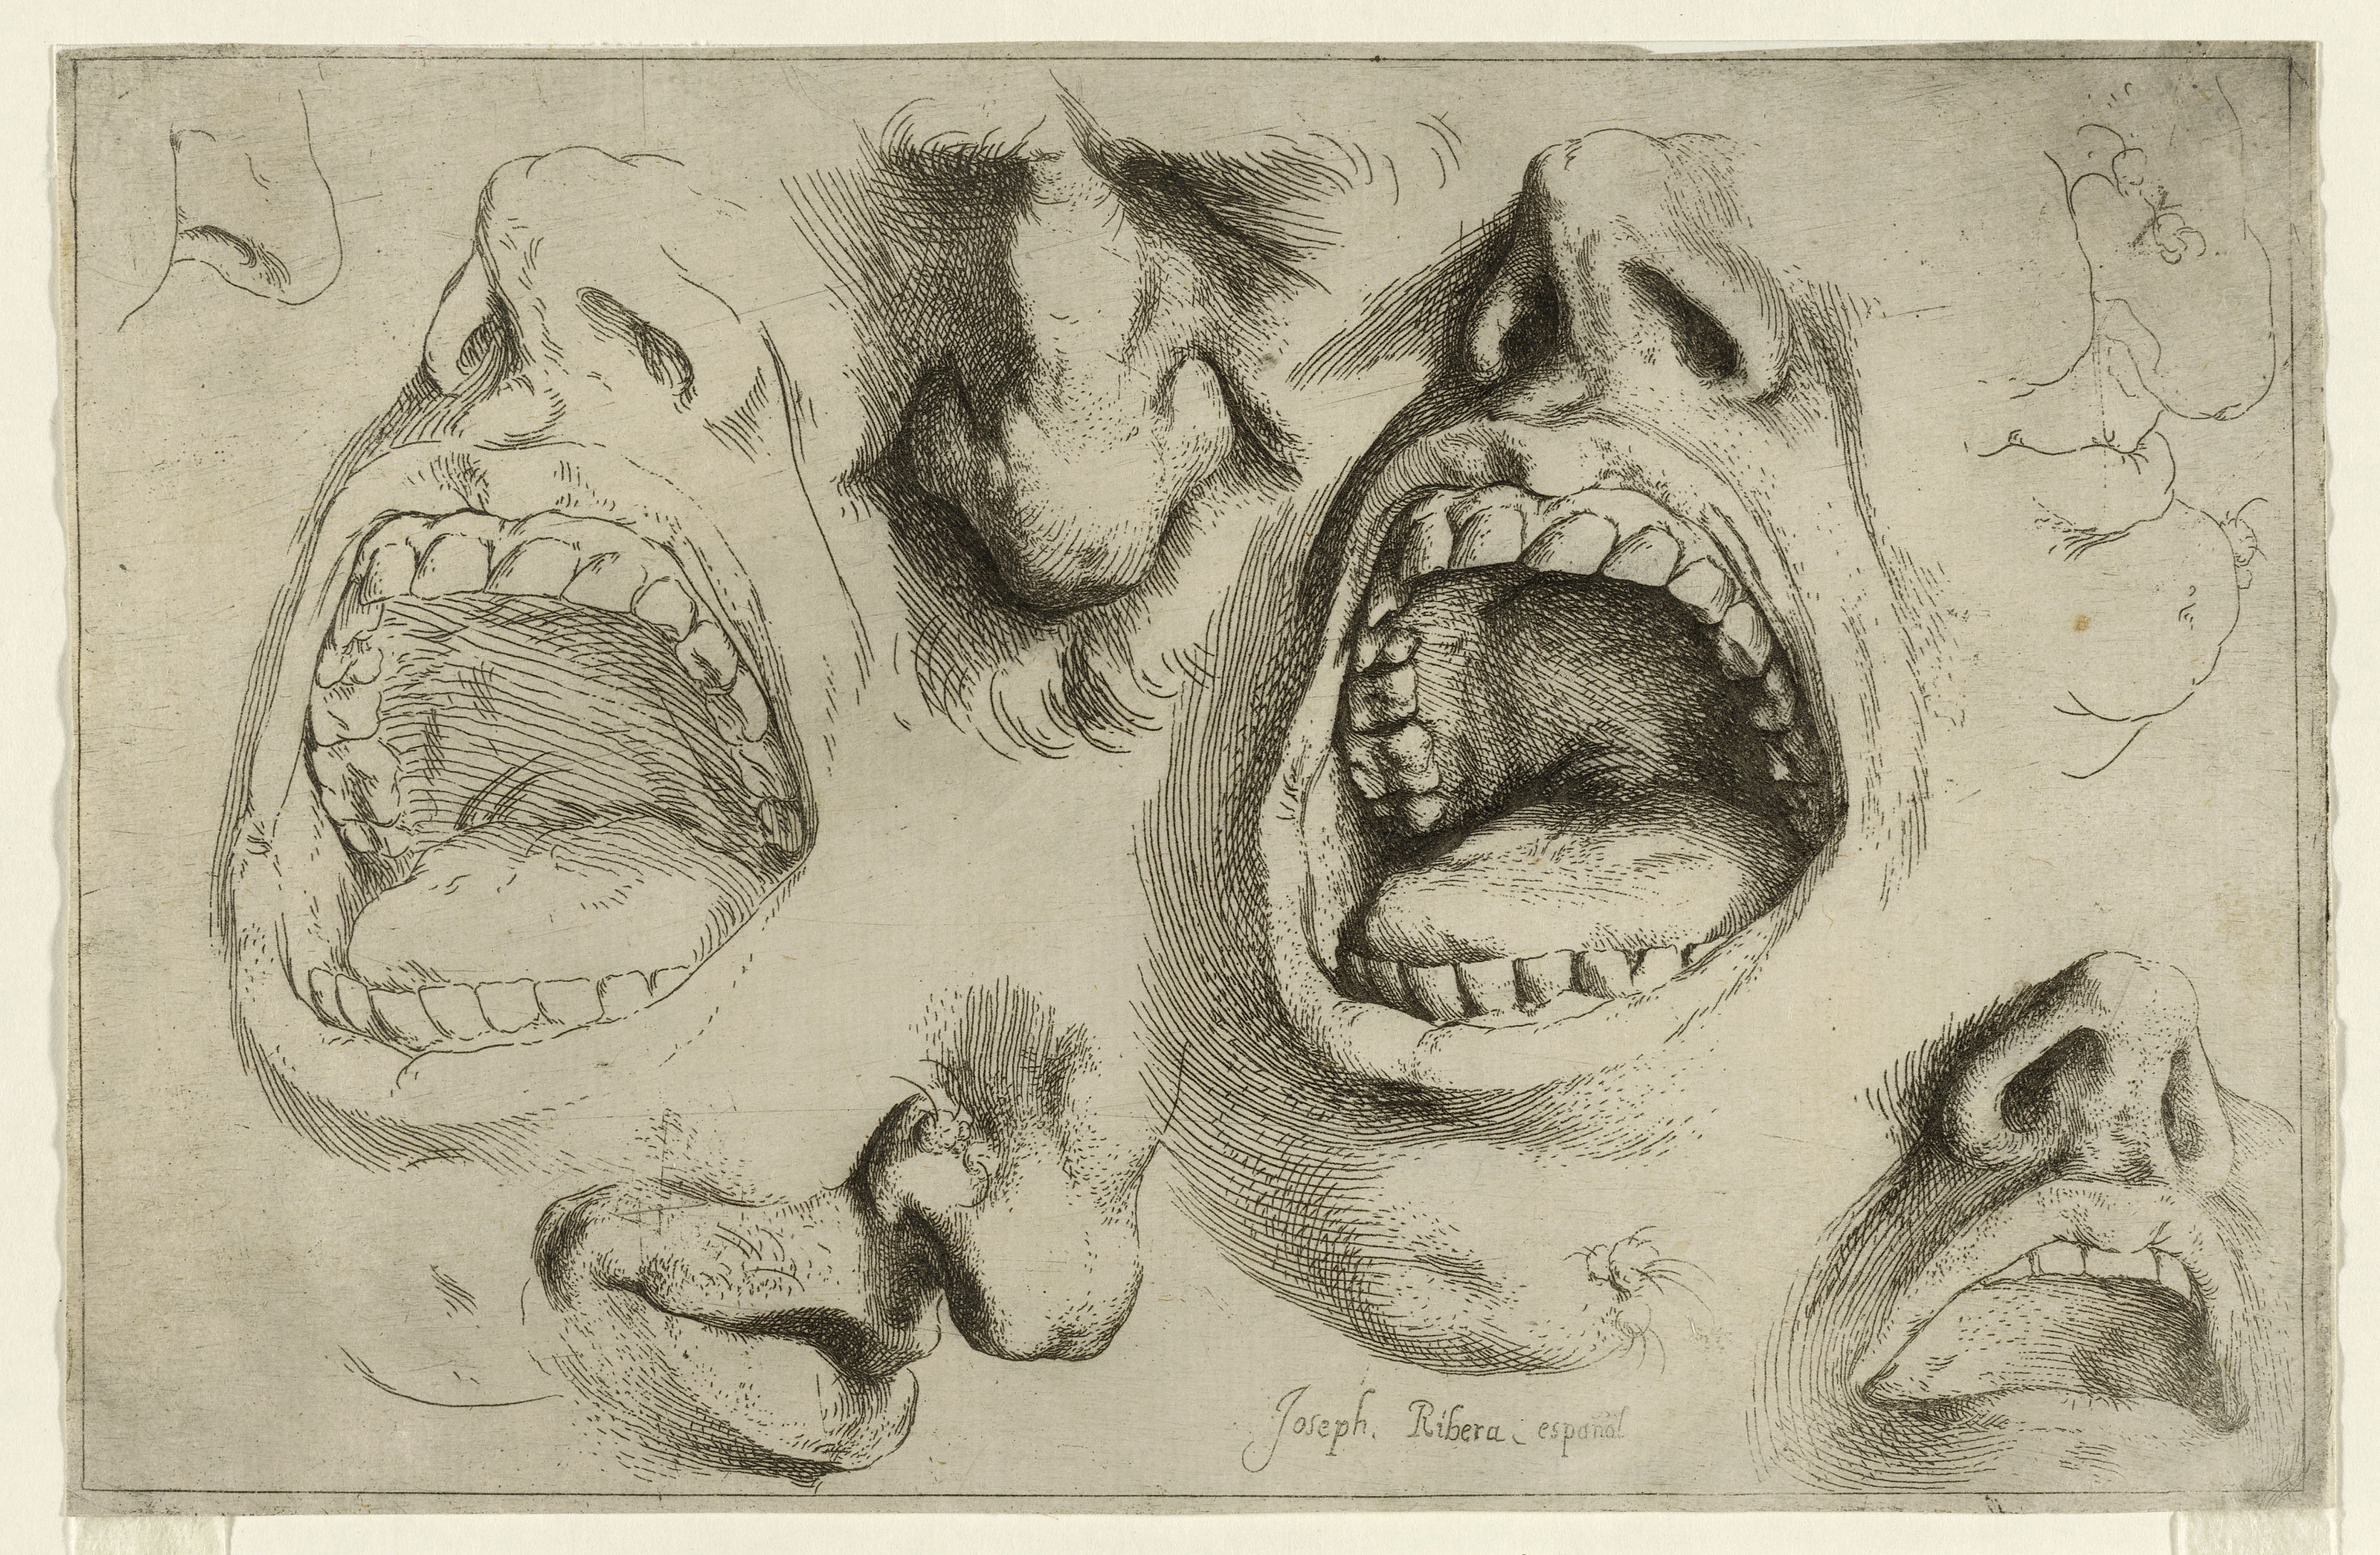 Jusepe de Ribera, Studies of the Nose and Mouth, c.1622, Etching, 14 x 21.6 cm, The British Museum, London. ©The Trustees of the British Museum. All rights reserved.